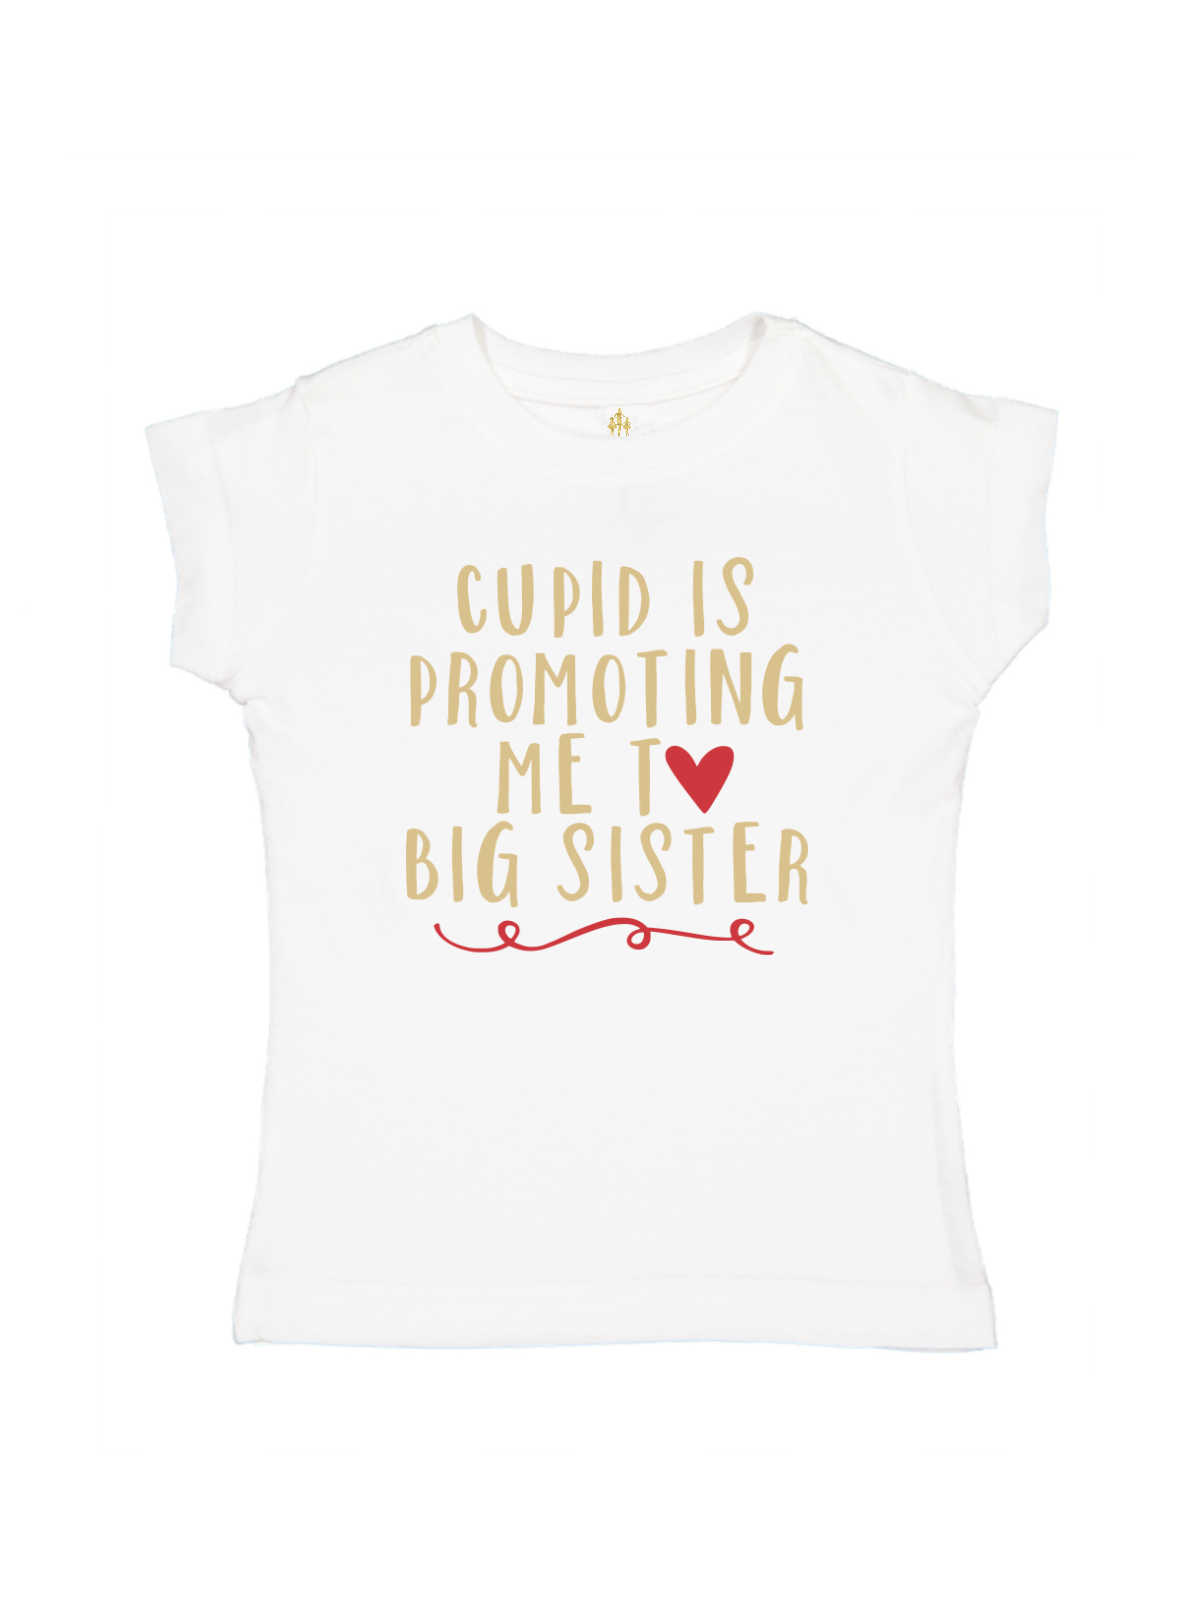 Cupid is Promoting Me to Big Sister Girls Valentine's Day Shirt